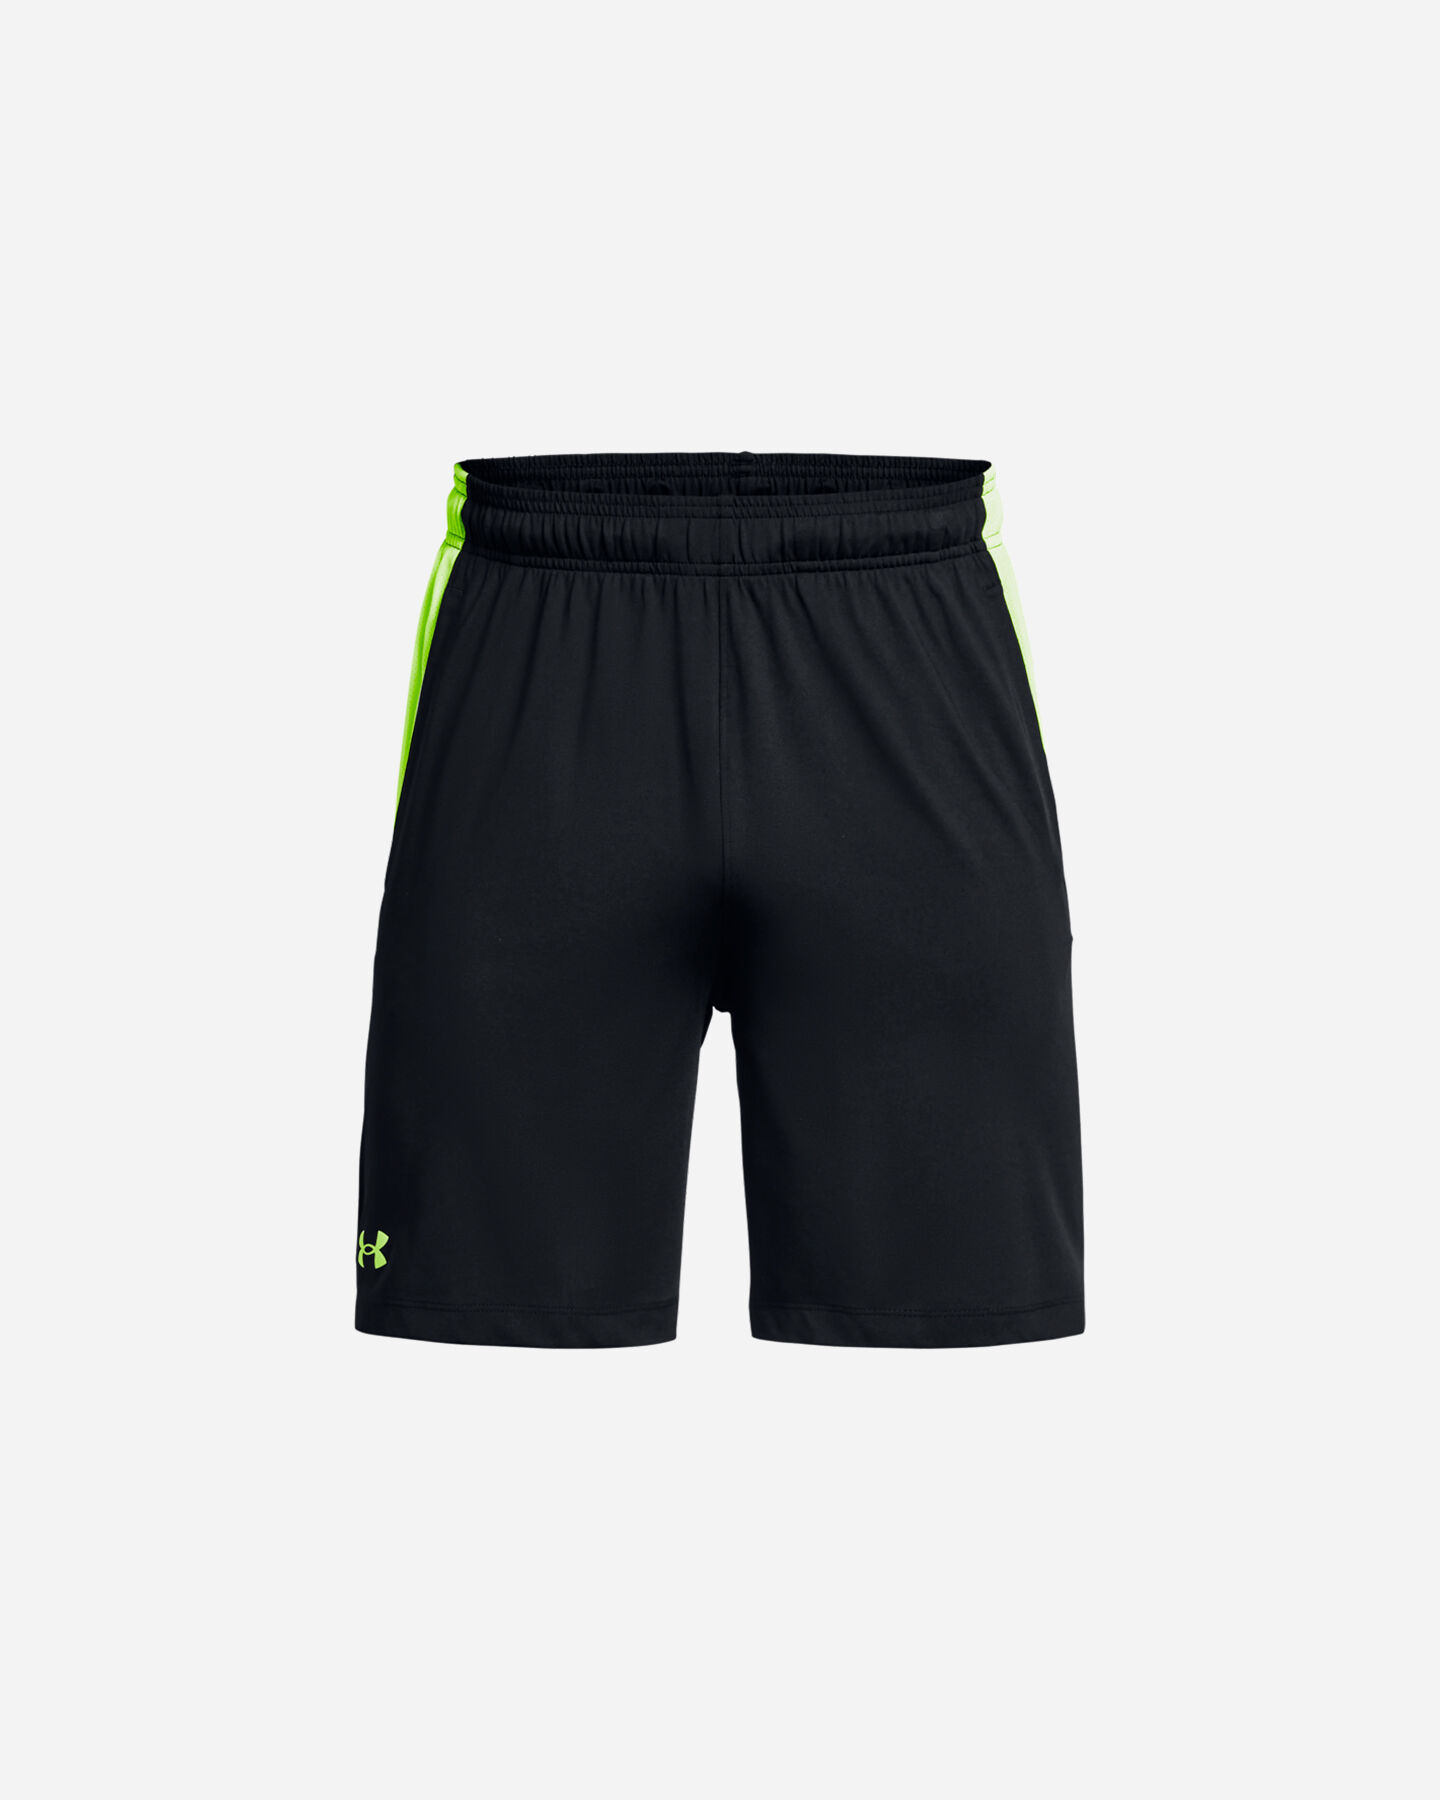  Pantalone training UNDER ARMOUR TECH VENT M S5649415|0002|XS scatto 0